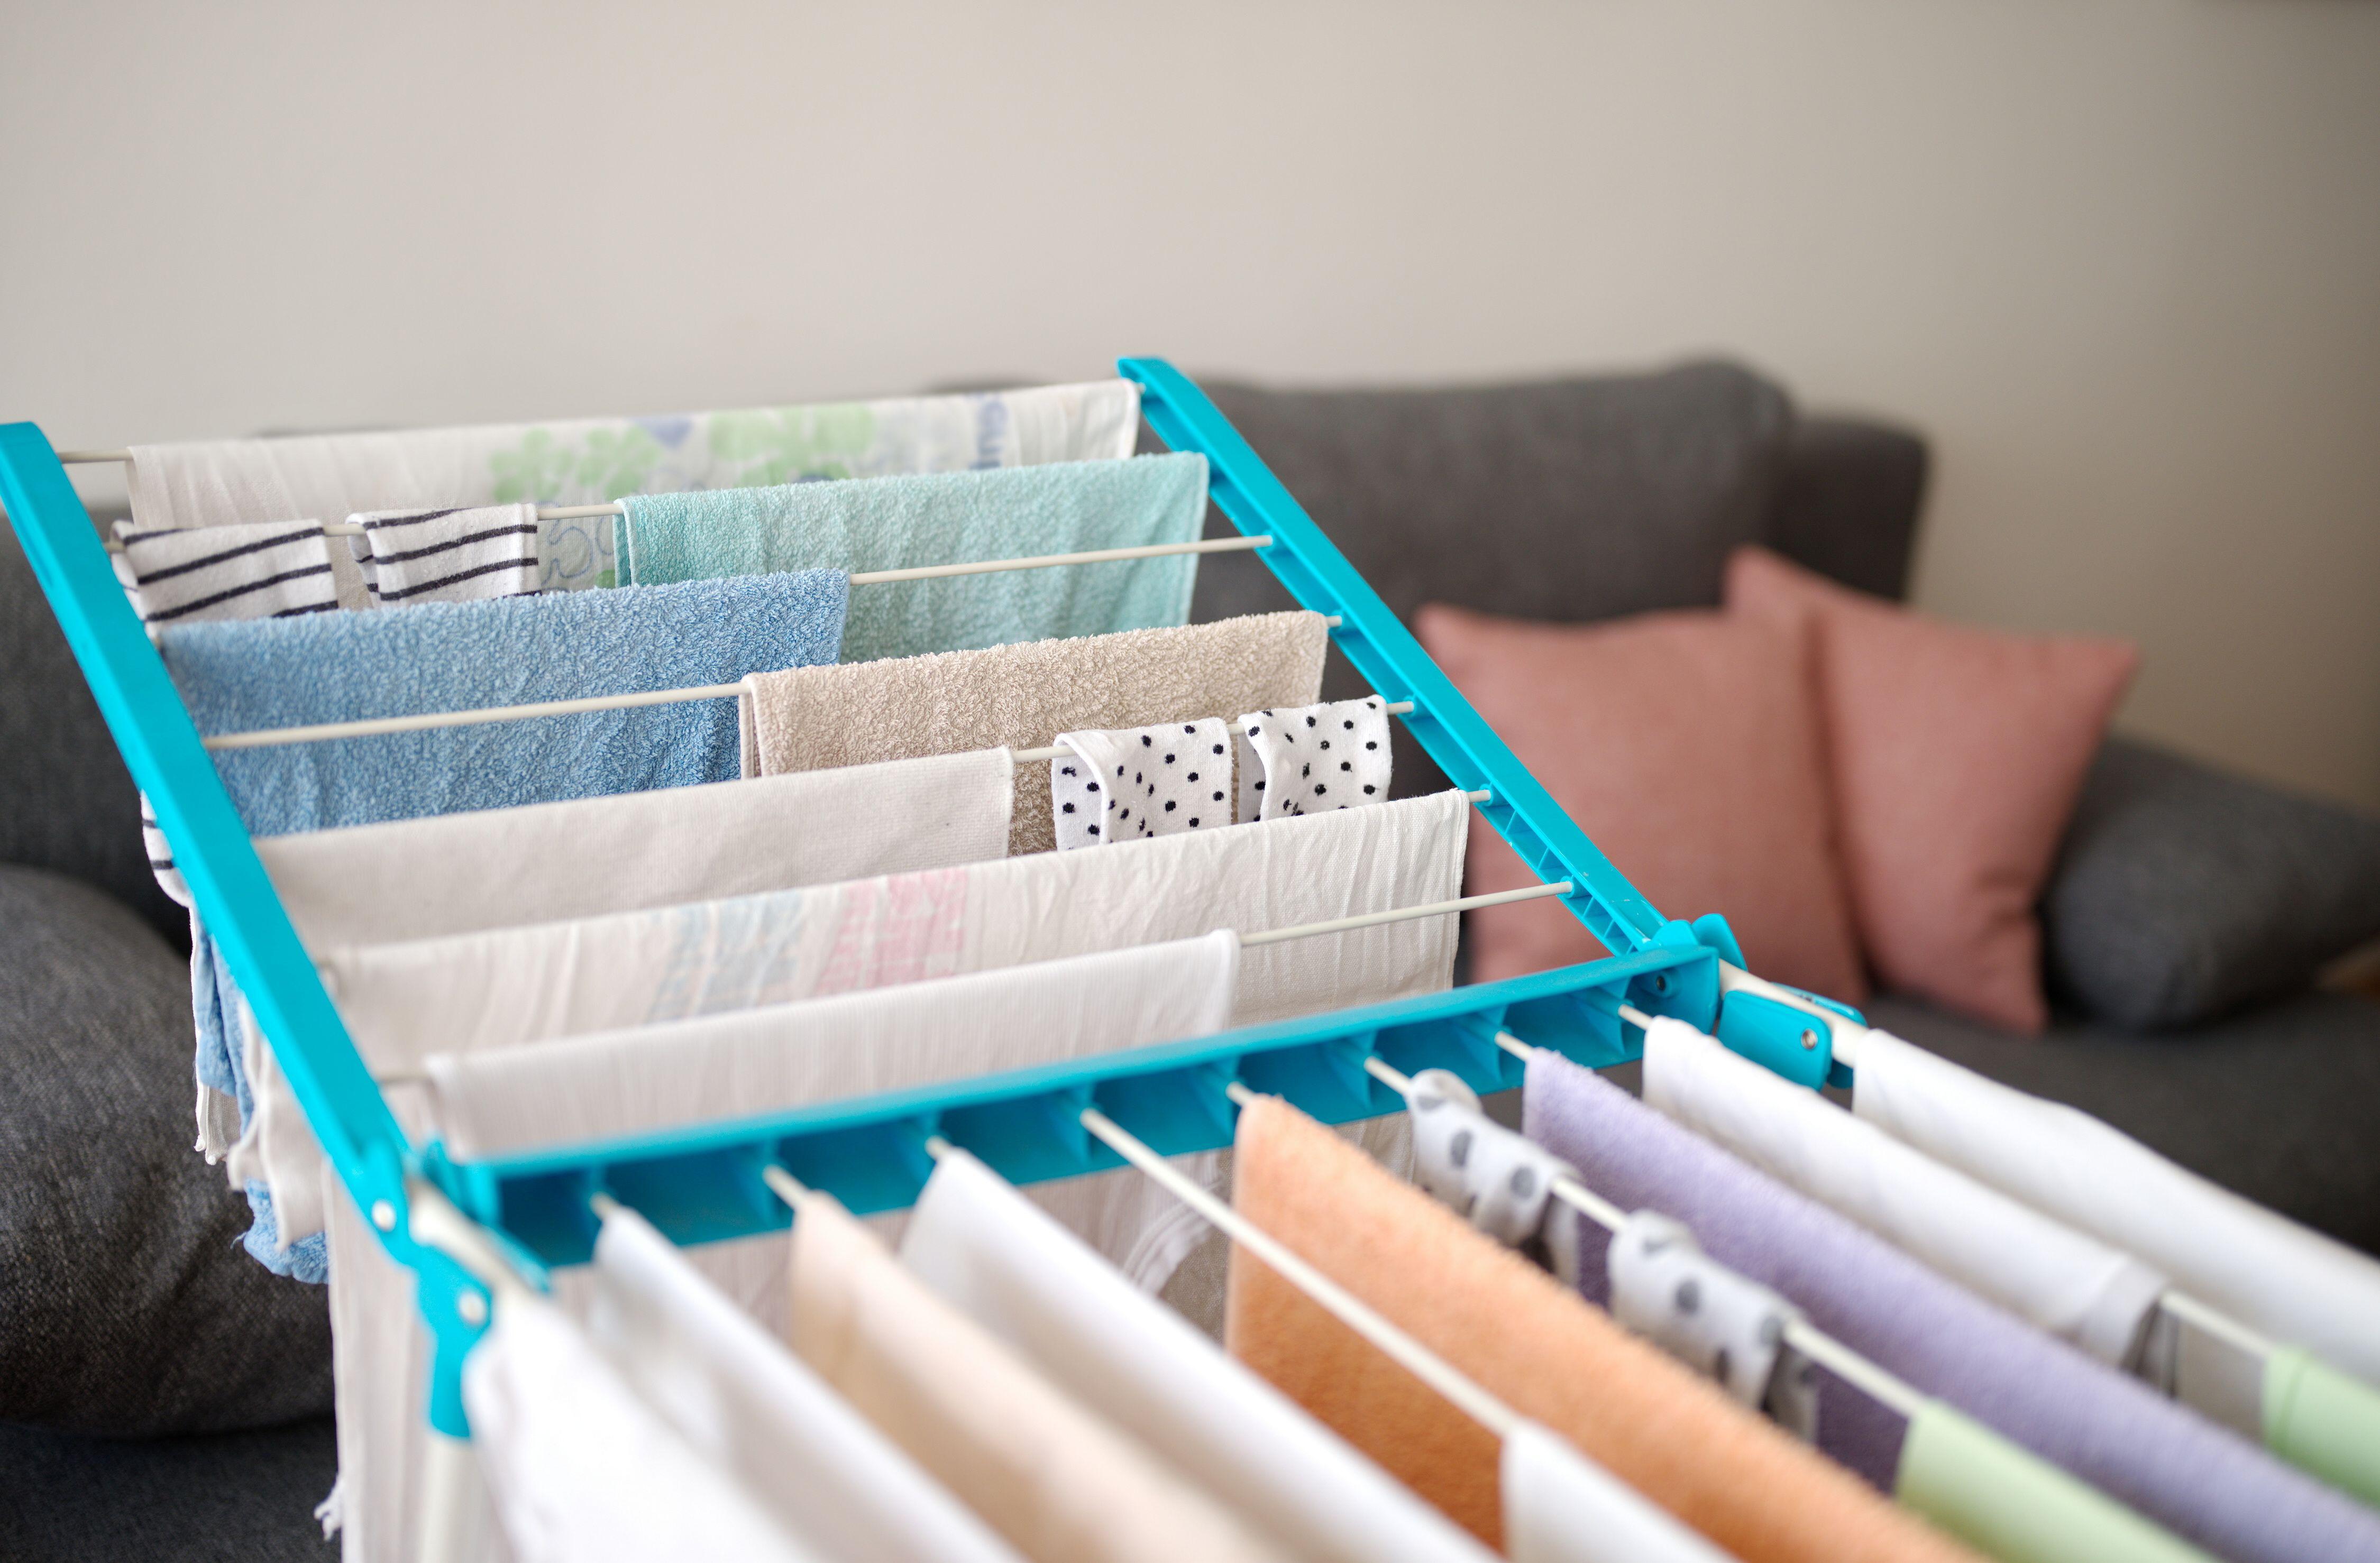 Laundry drying on clothes rack